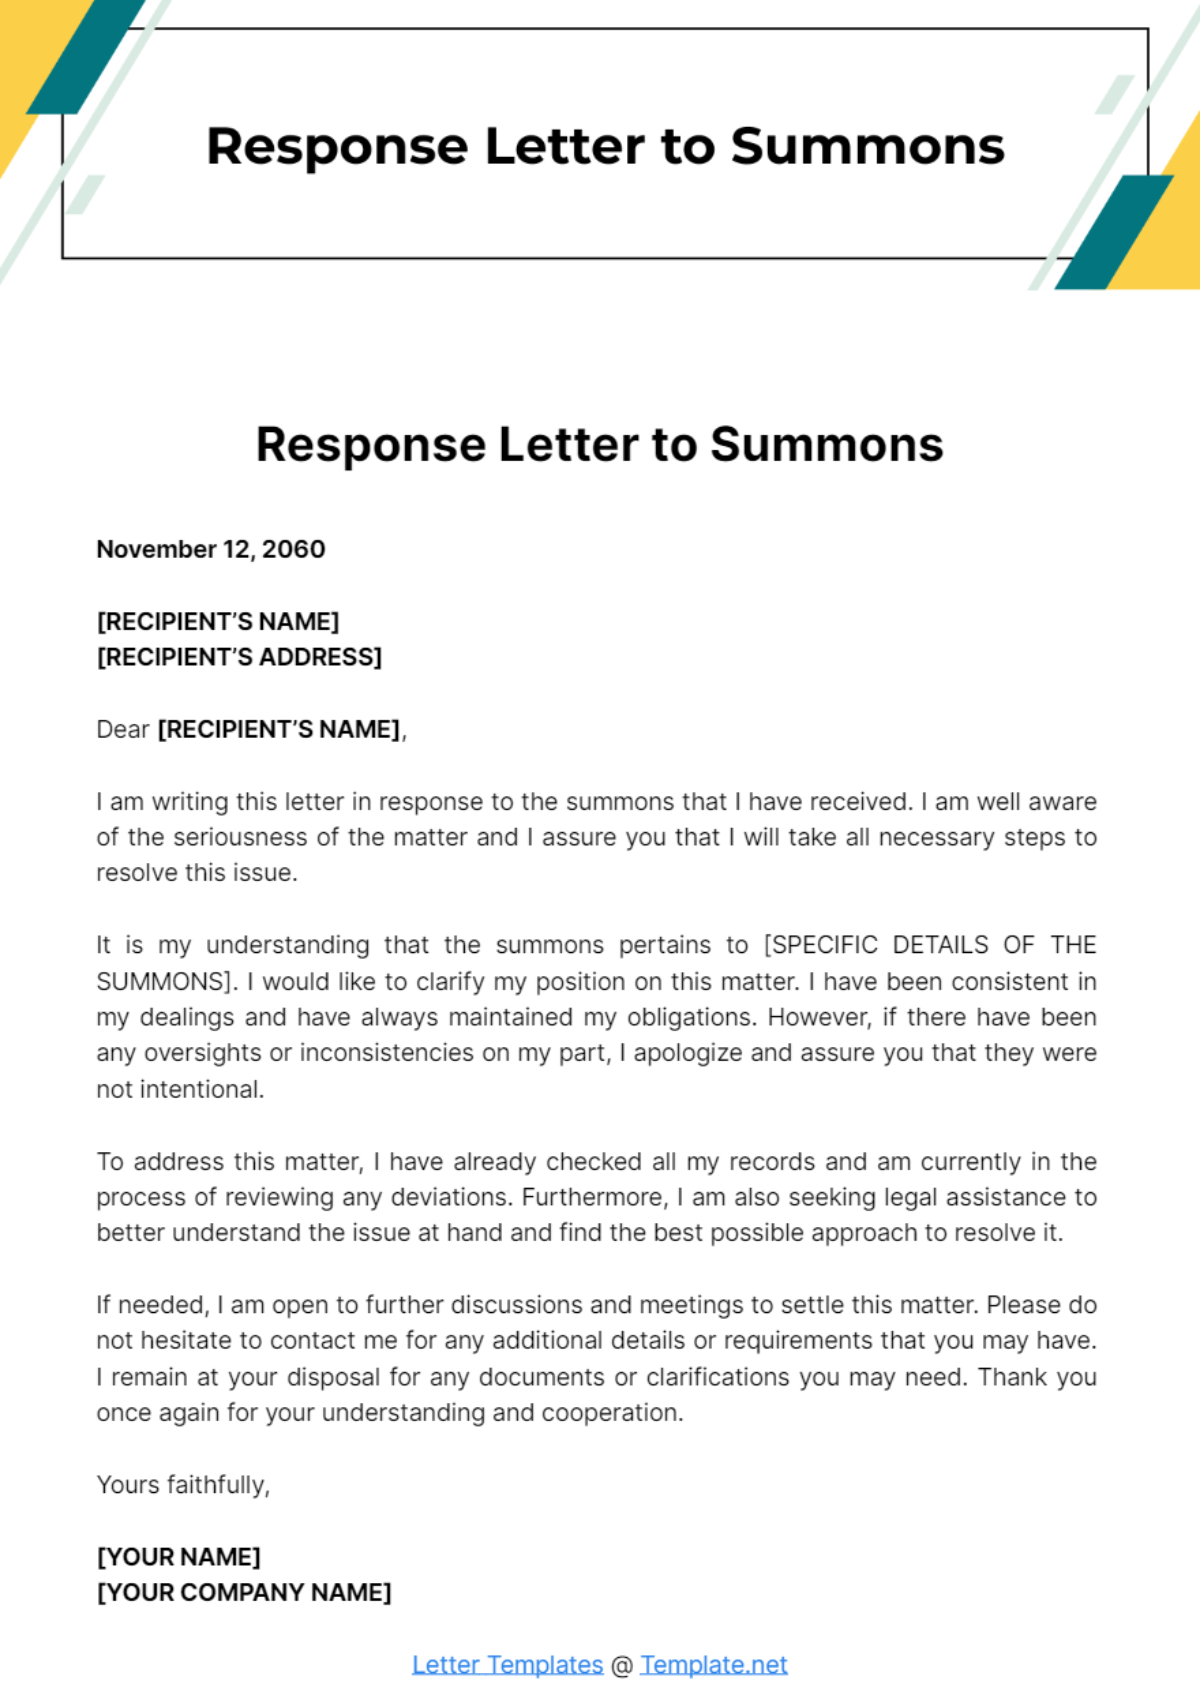 Response Letter to Summons Template